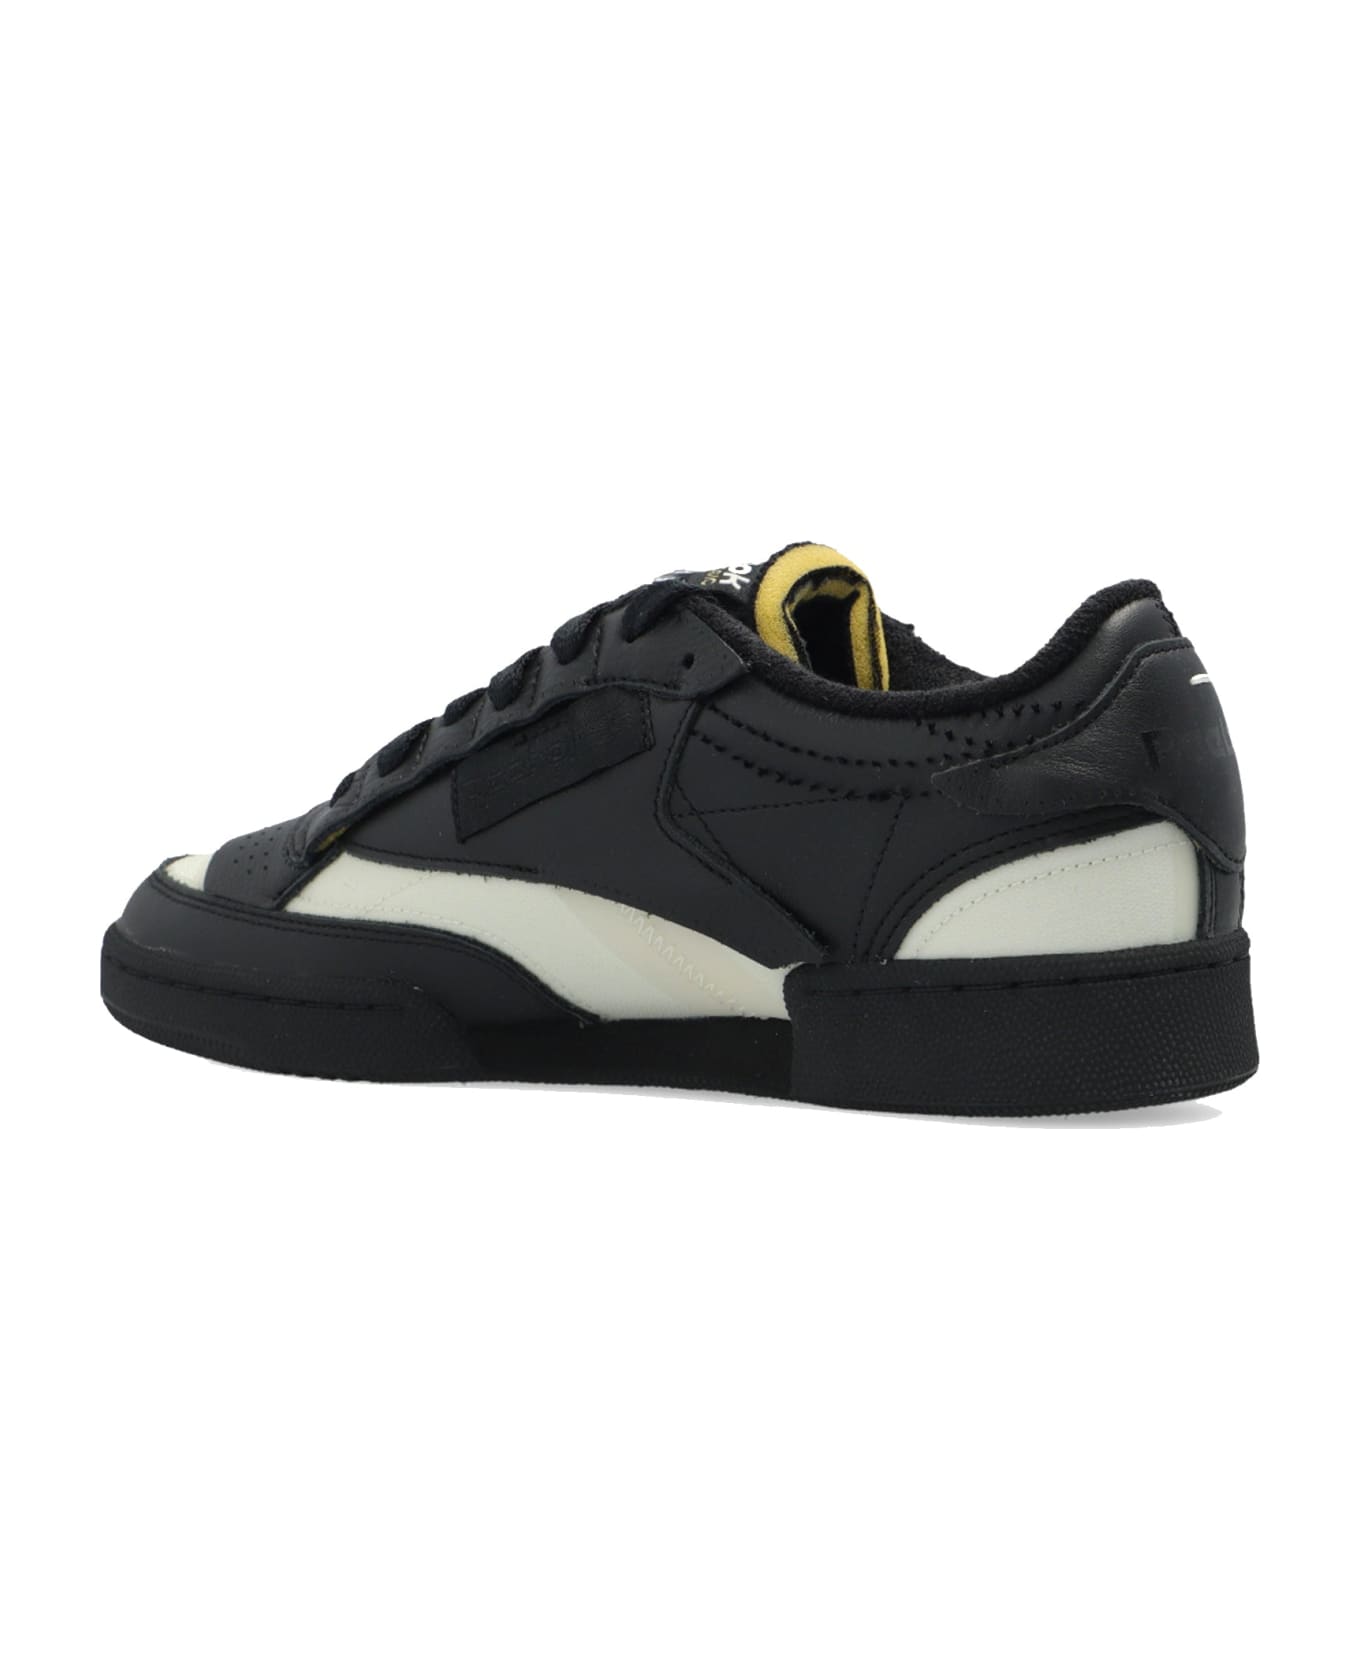 Maison Margiela Leather And Fabric Sneakers - Black